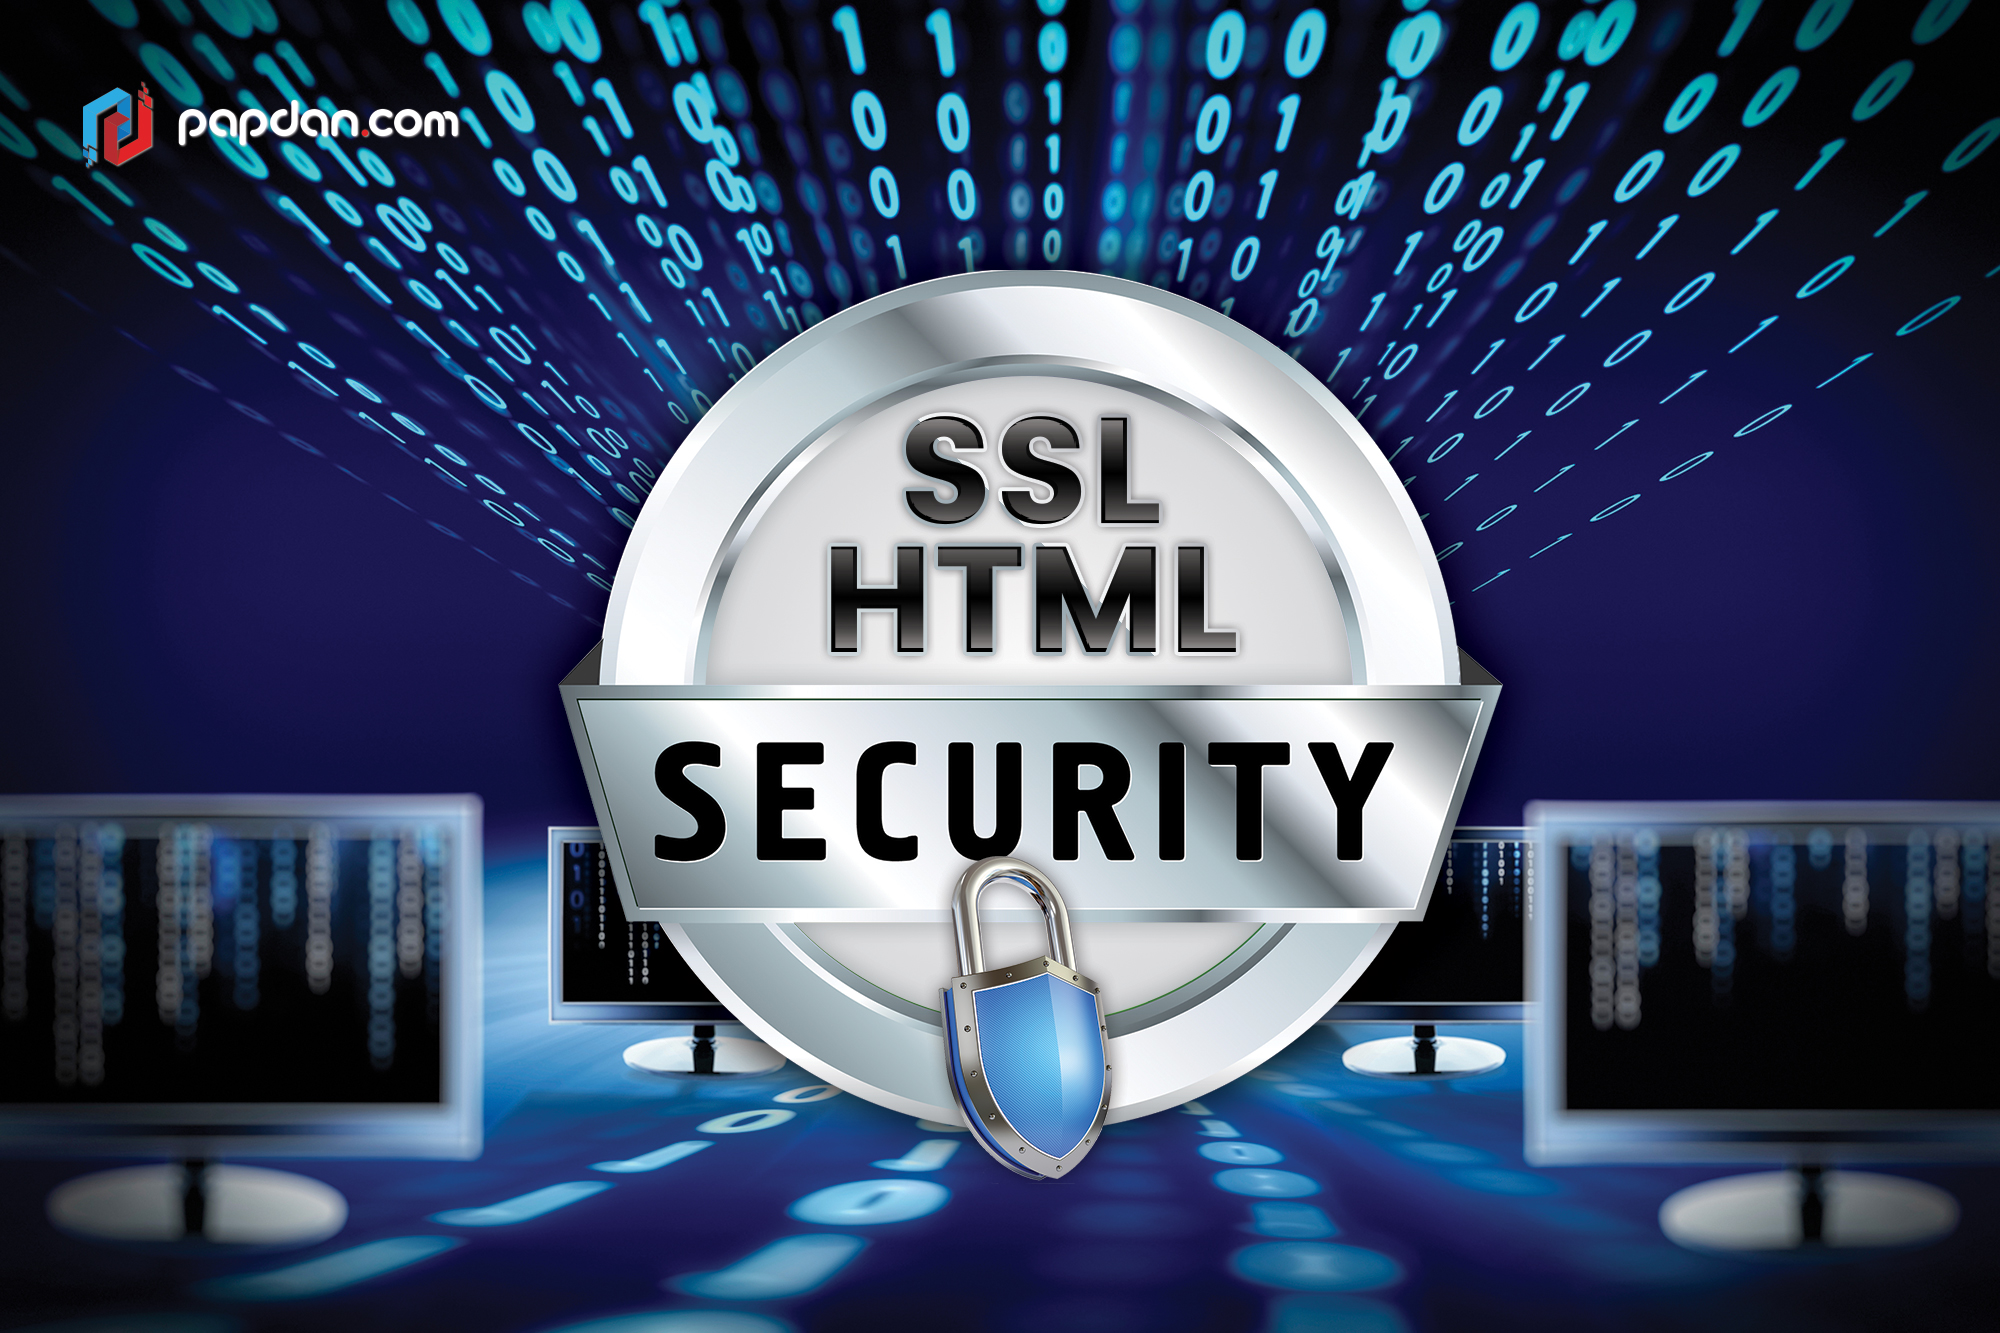 Tips & Tricks to Move Your Website to HTTPS/SSL